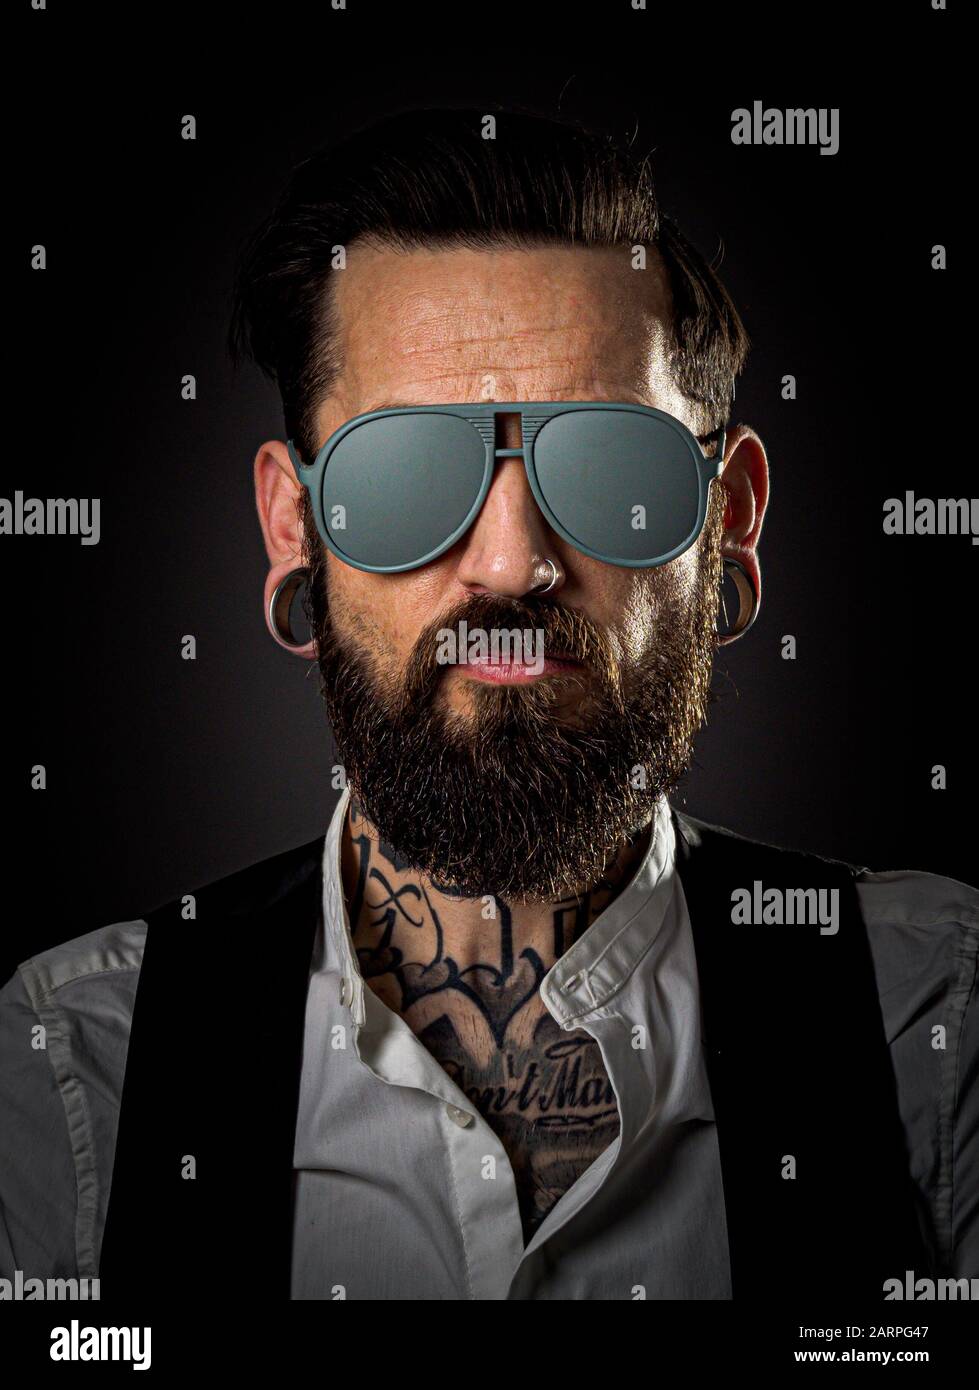 Studio Portrait of a male model with beard and tattoos. Wearing grey sunglasses Stock Photo